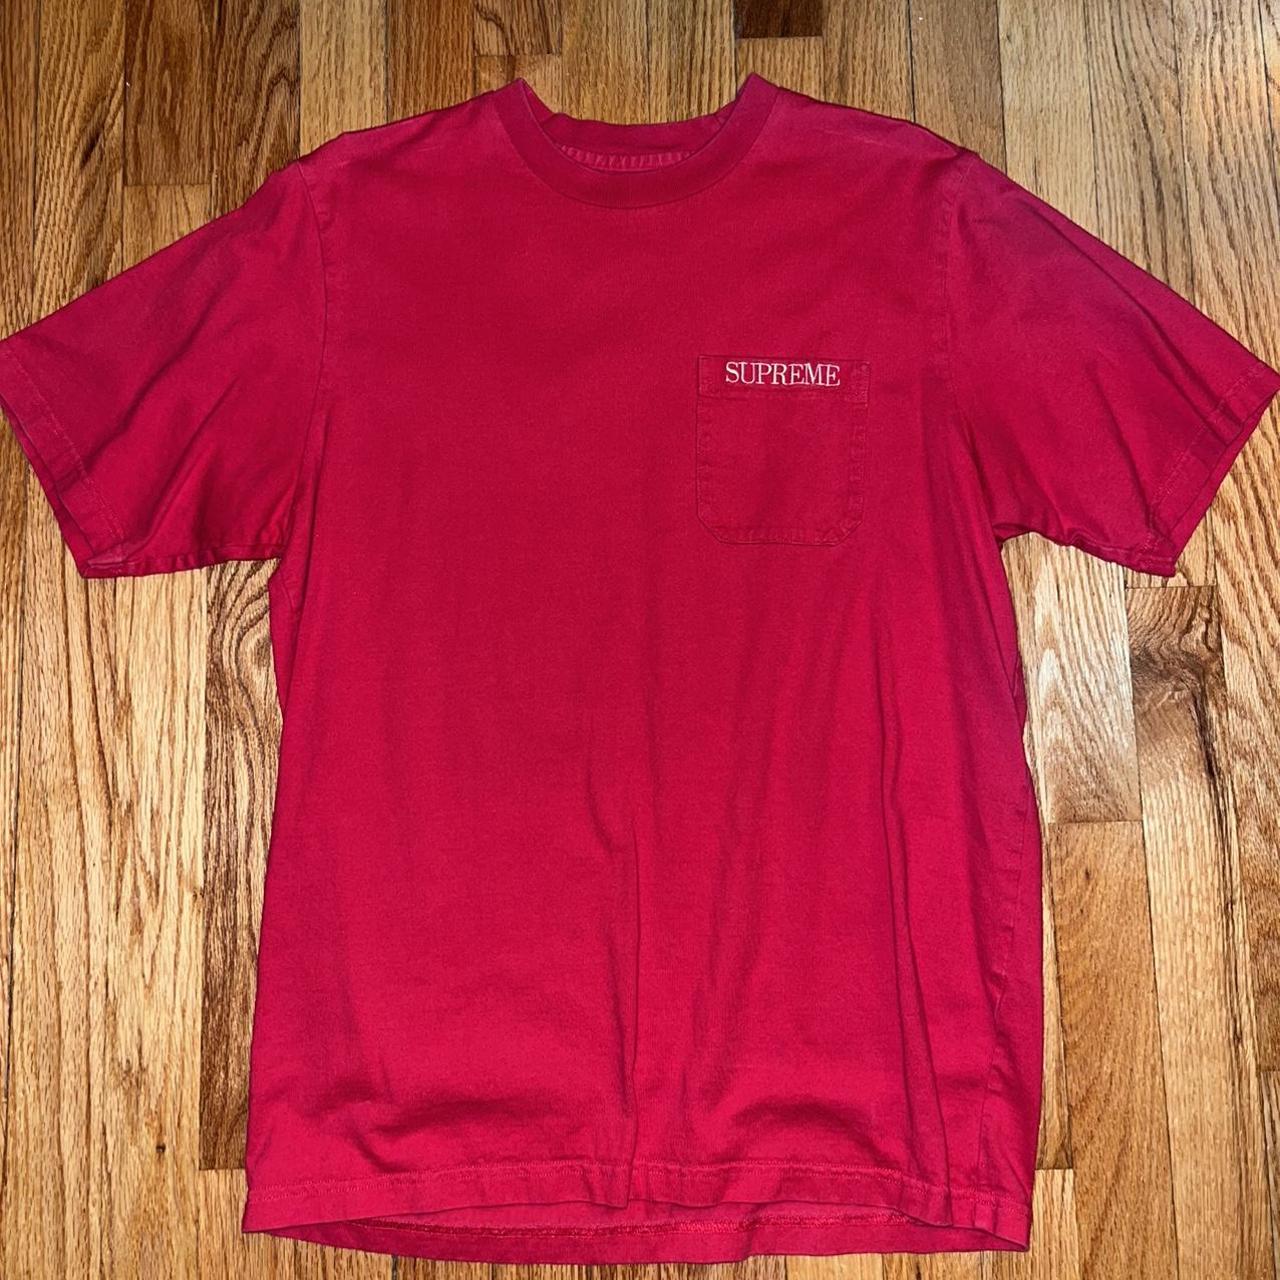 Supreme Men's White and Red T-shirt | Depop